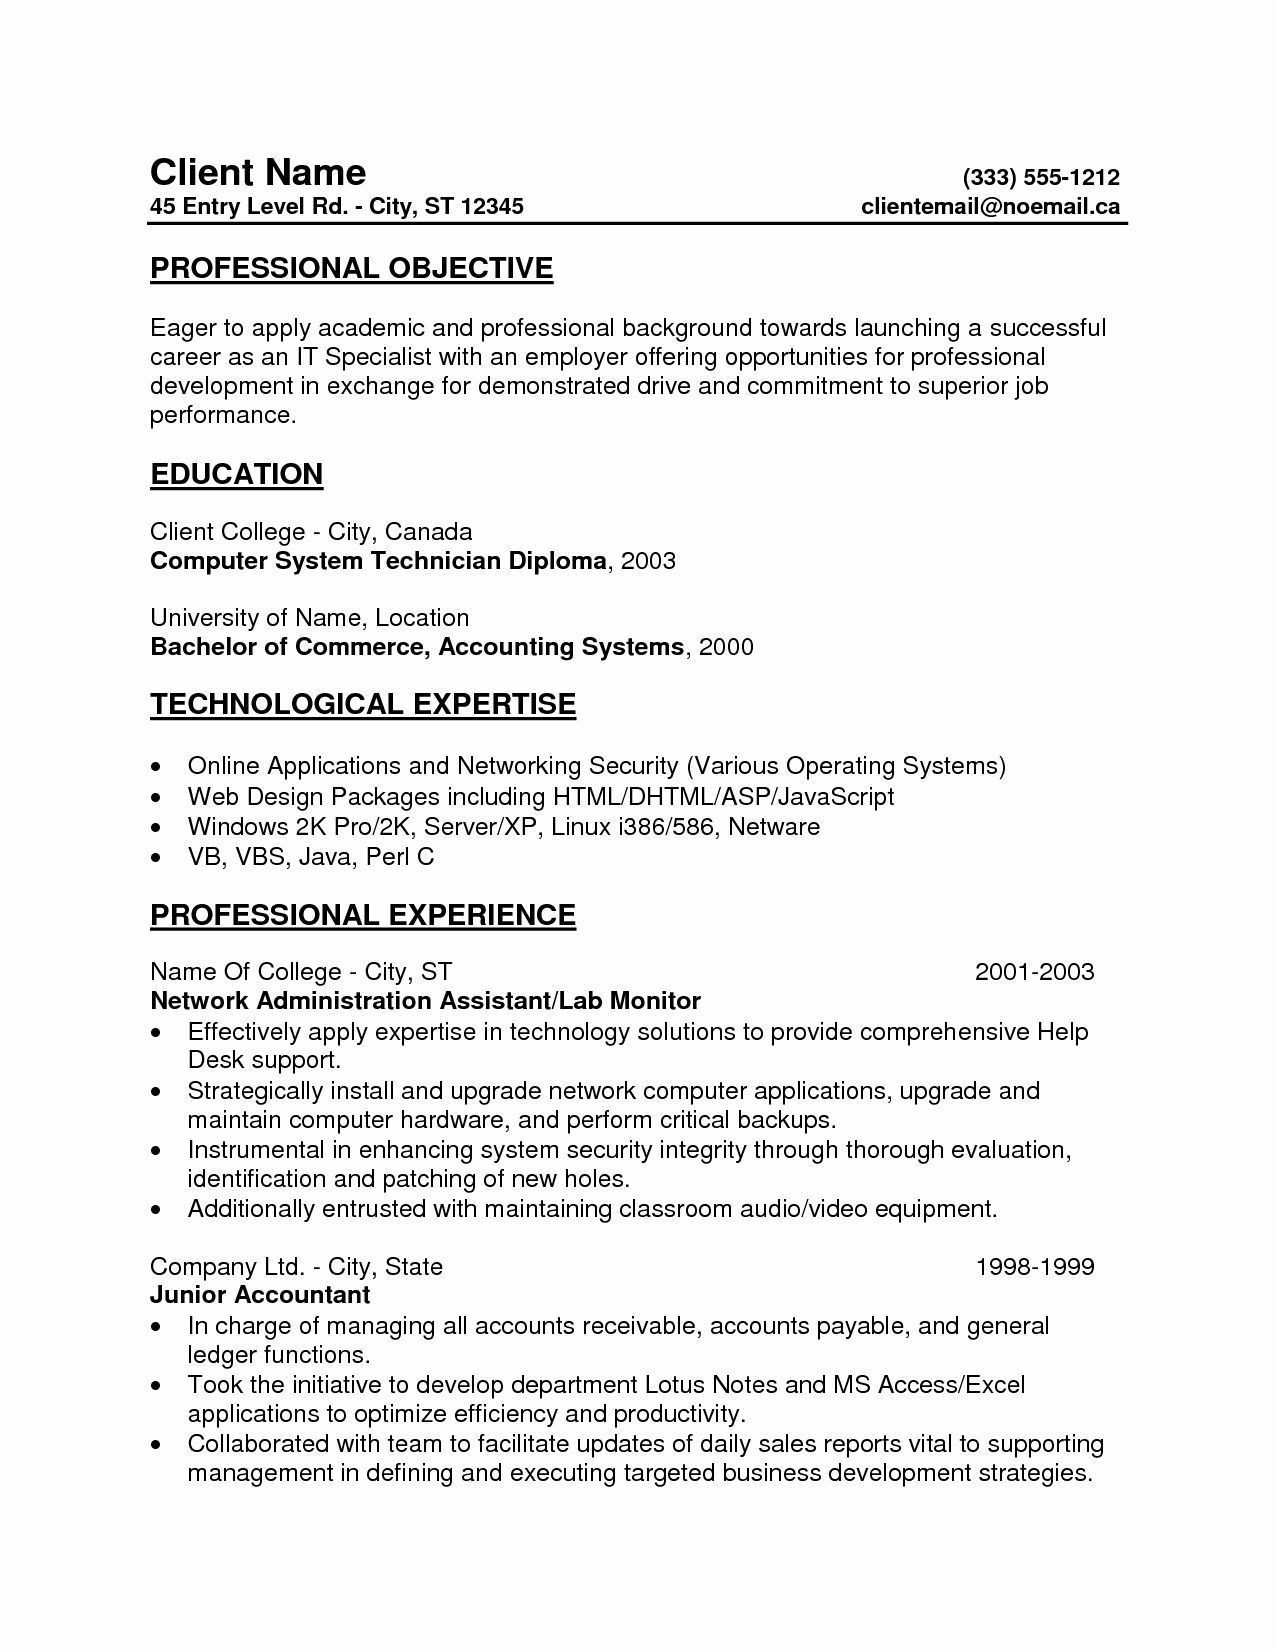 Sample Resume Objective Statements Entry Level Resume Objective Examples Entry Level